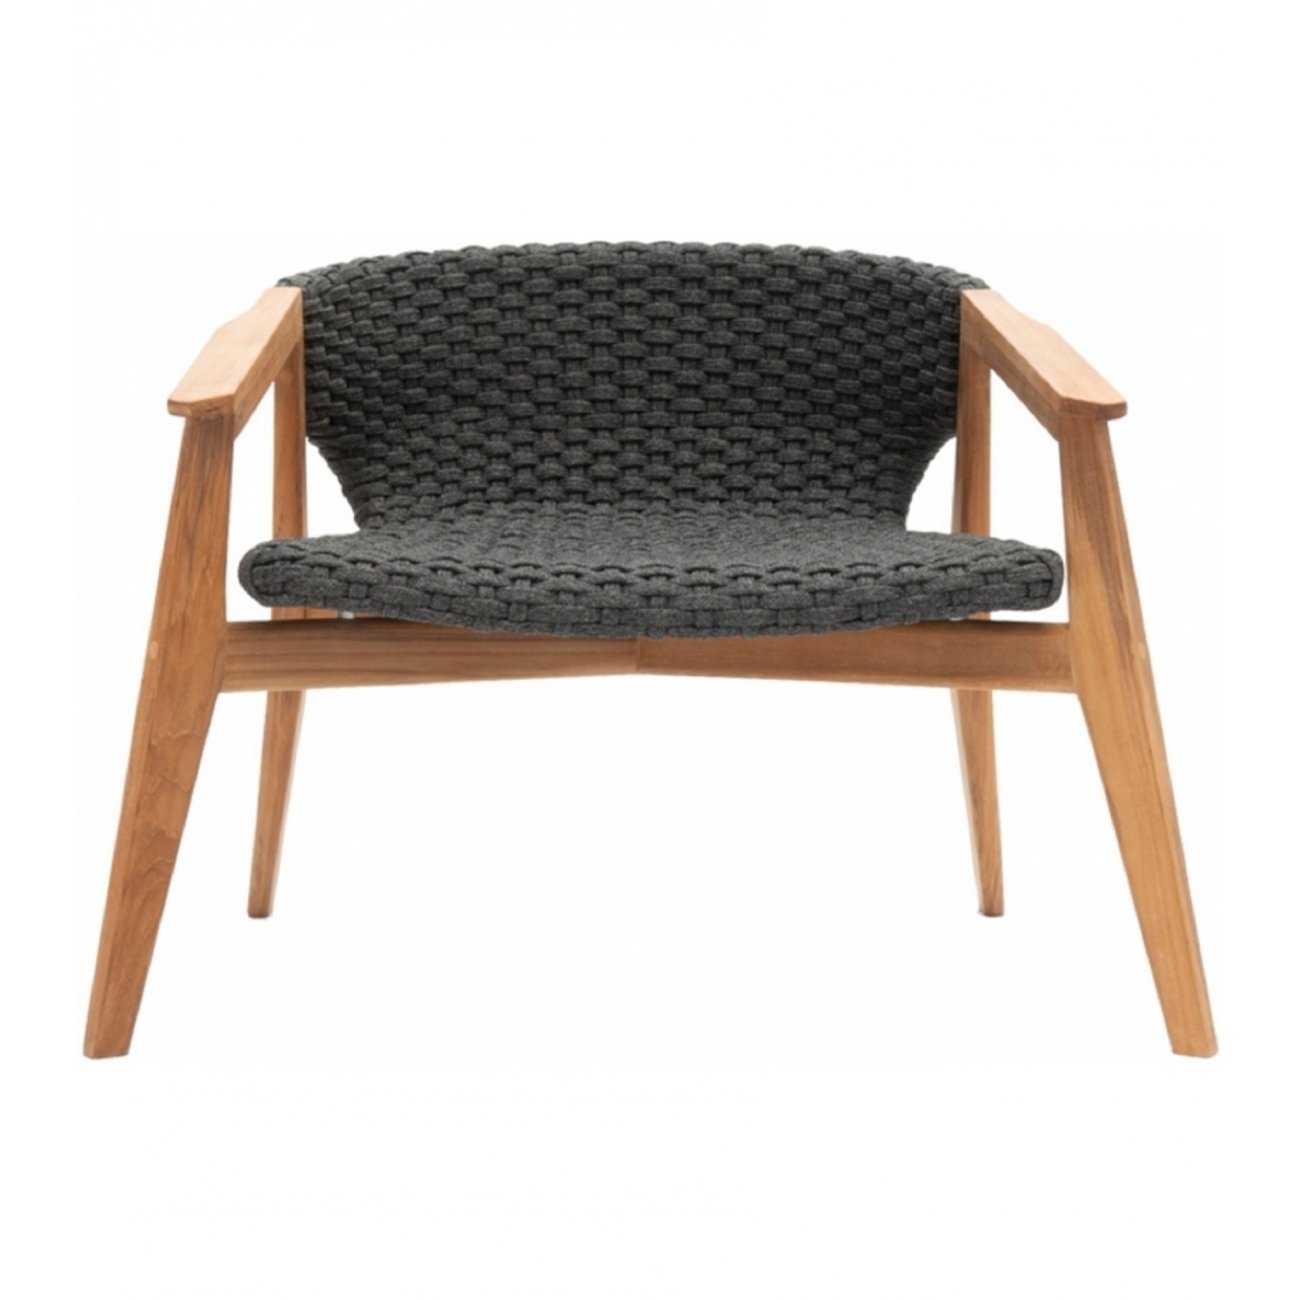 Ethimo Knit Lounge Chair | Wooden | Outdoor-Patio Furniture - Ultra Modern
